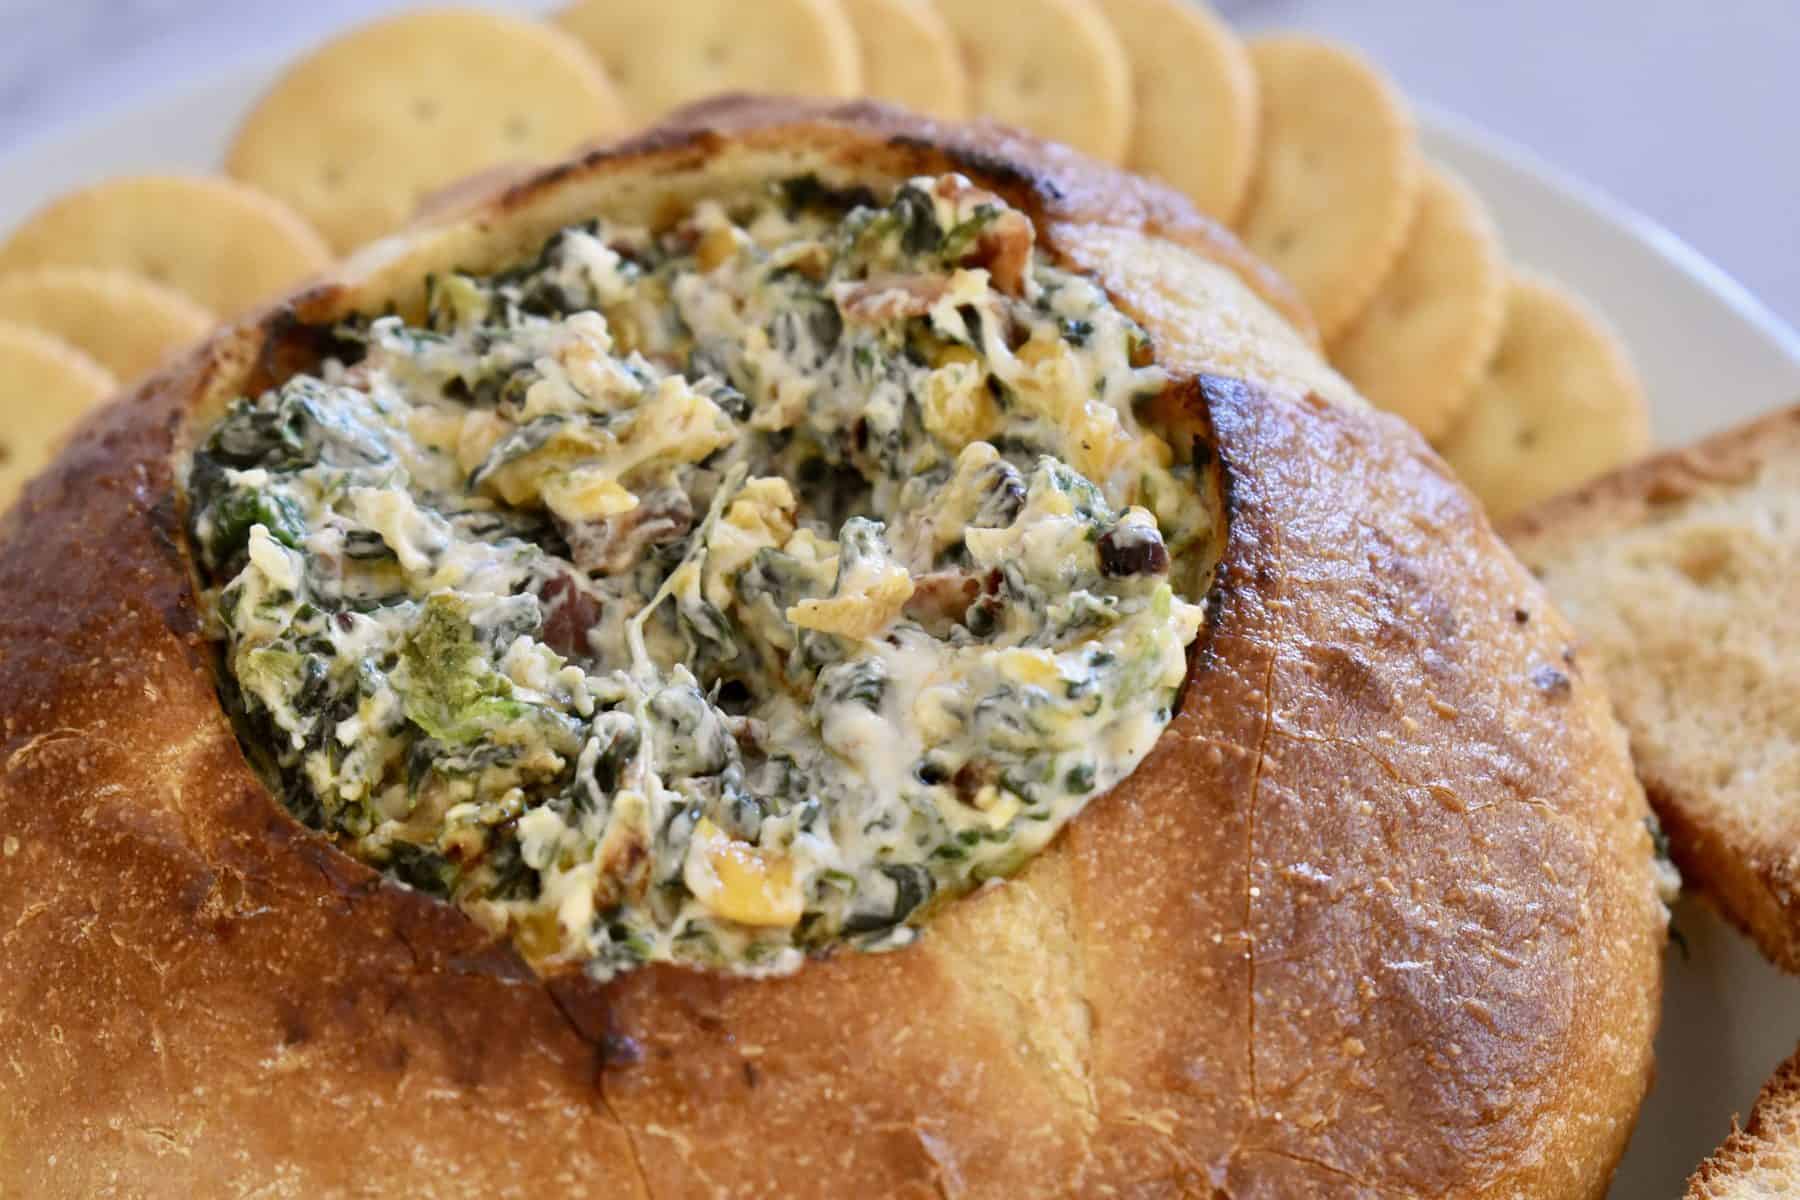 Close up view of hollowed out sourdough loaf with bacon spinach dip inside.